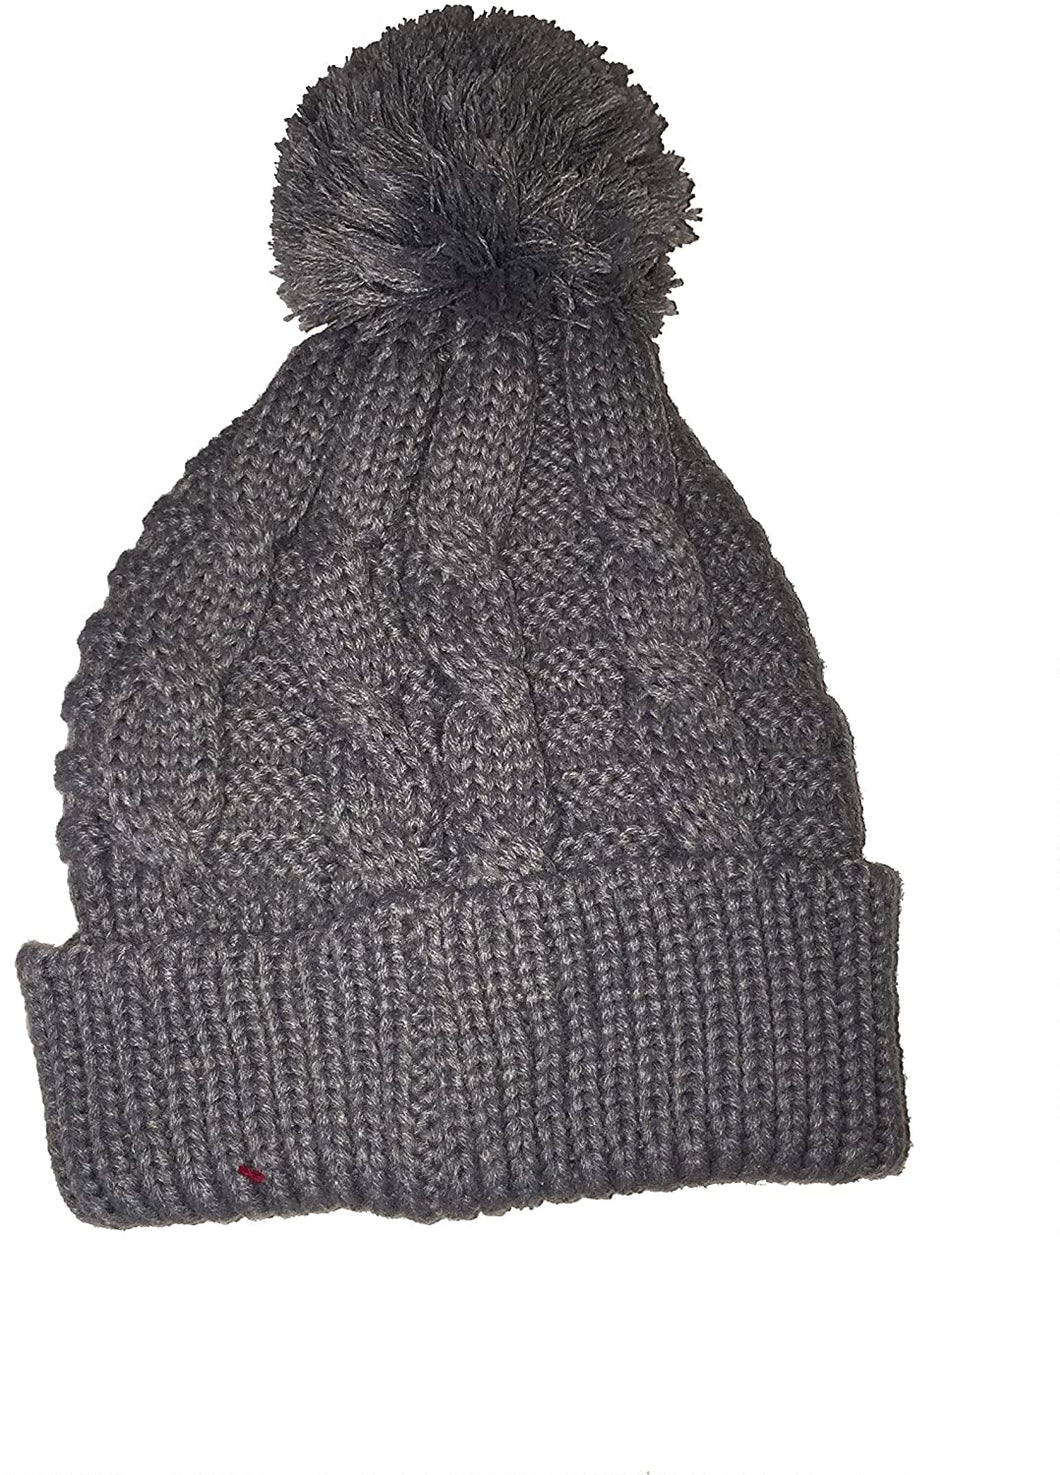 Pamper Yourself Now Unisex Grey Winter hat/Beanie with Bobble